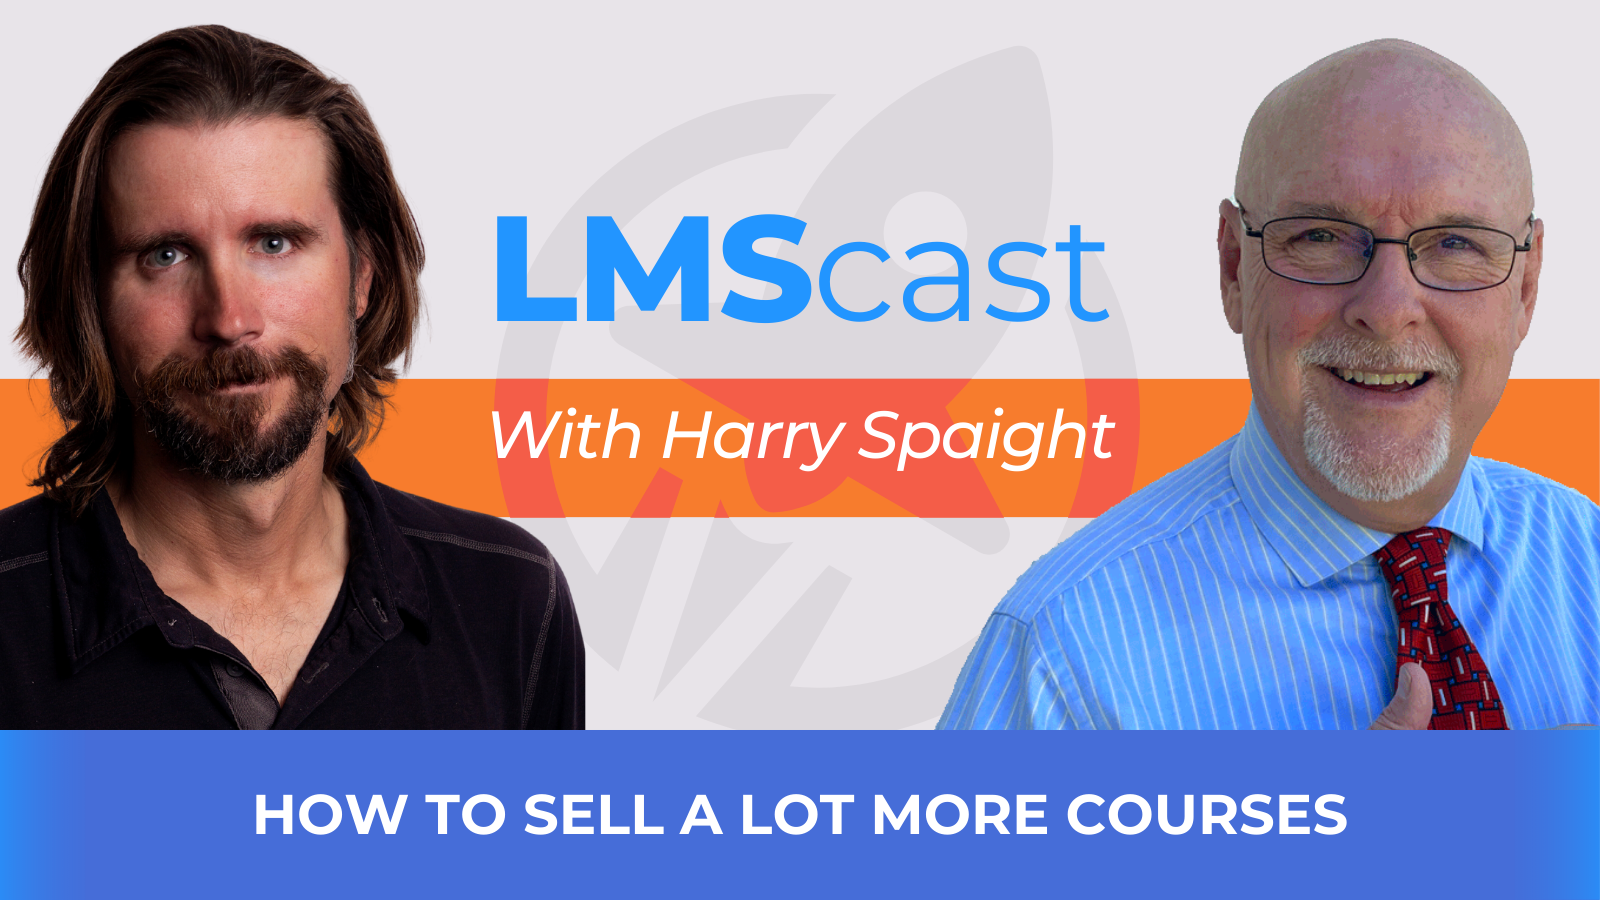 How to Sell a Lot More Courses with Harry Spaight